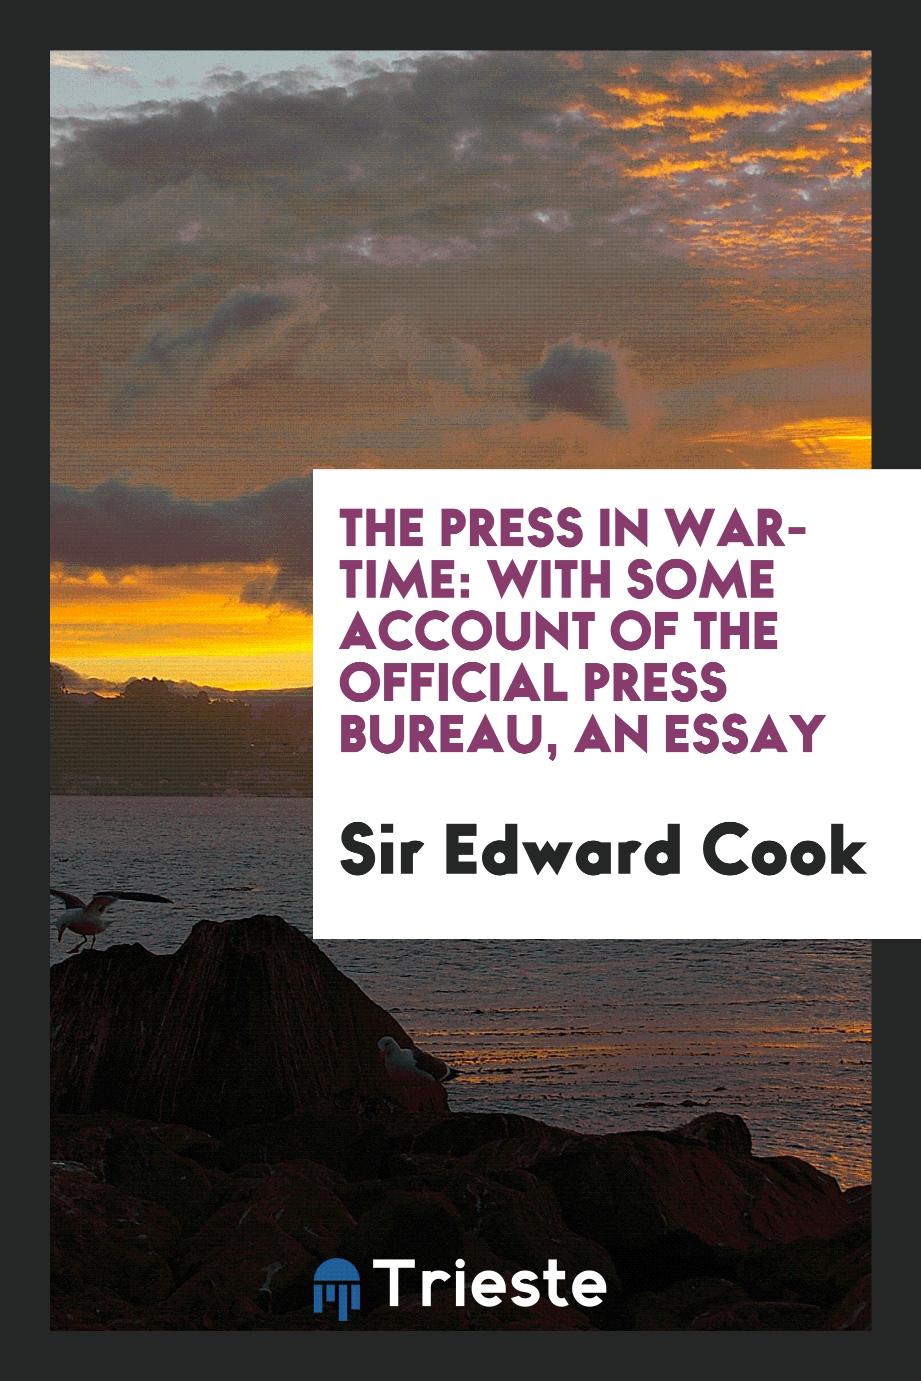 The press in war-time: with some account of the Official Press Bureau, an essay